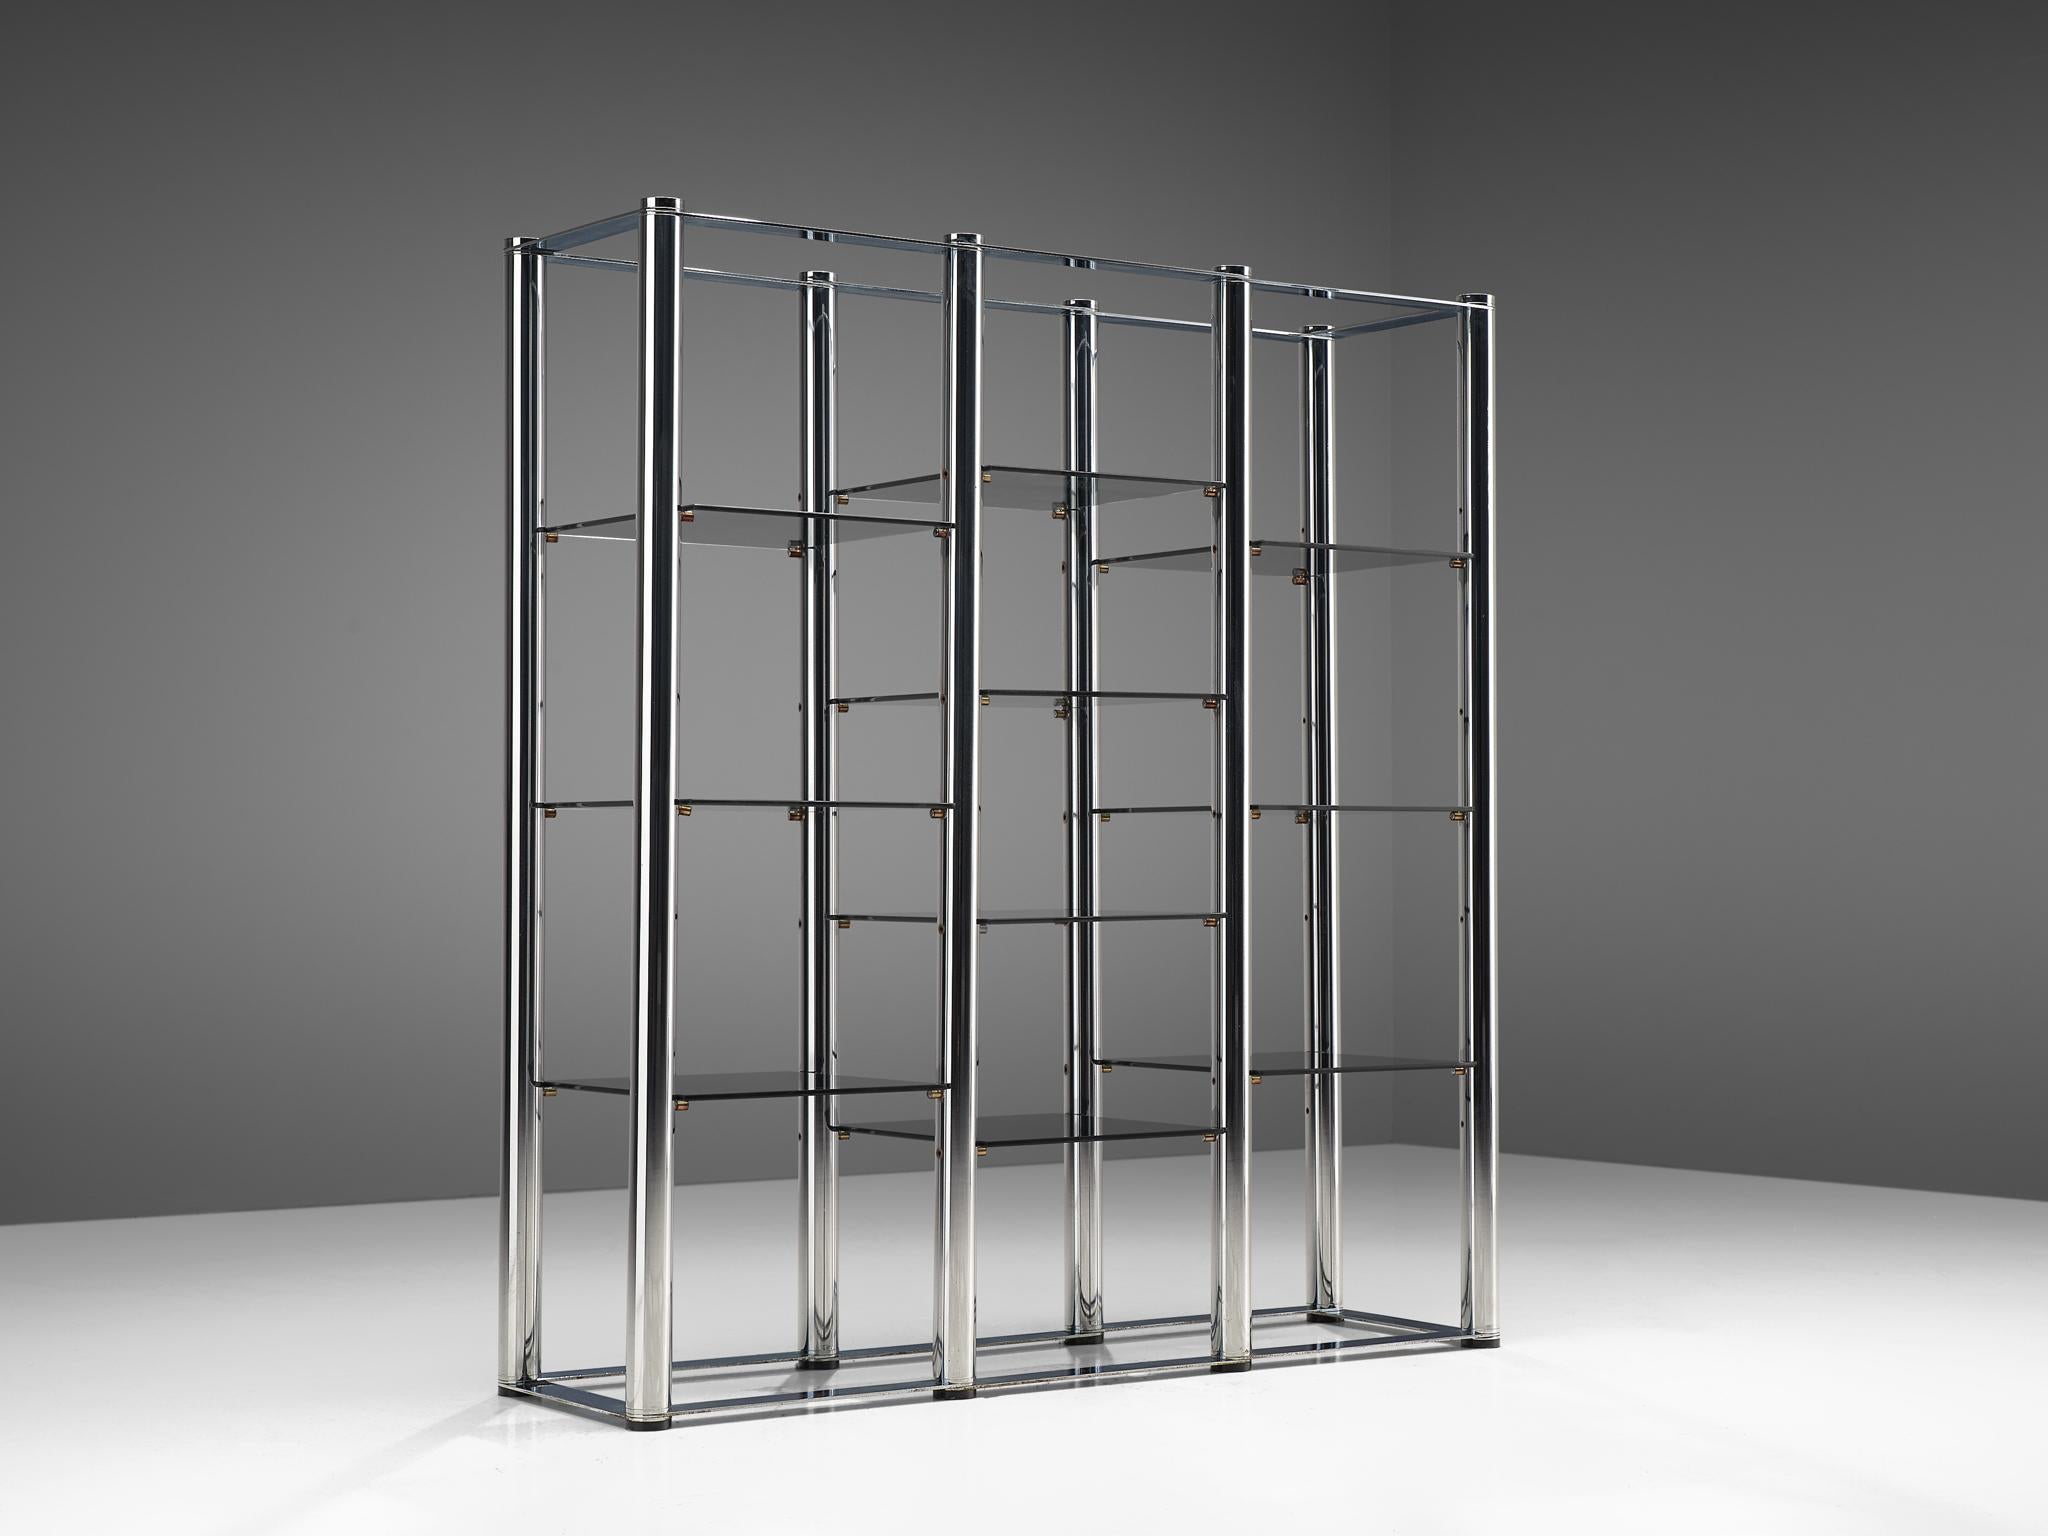 Étagère, chrome and glass, Germany, 1960s.

Germany shelving unit with a chrome tubular frame. The frame consists of thick tubes which is a striking combination with the thin smoked glass shelves. This creates an interesting visual effect, with